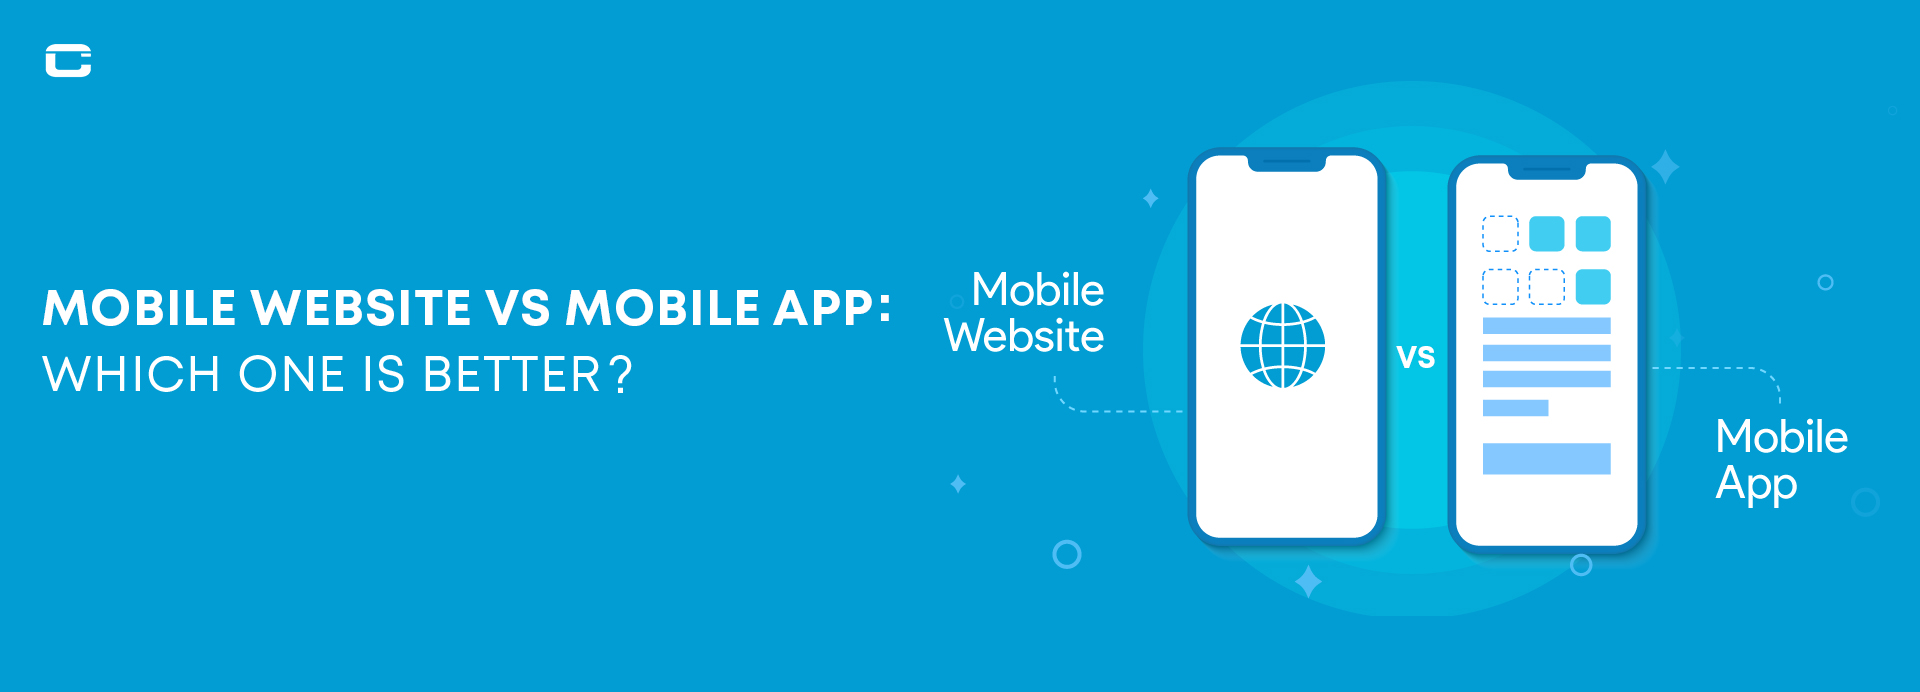 Mobile Website Vs Mobile App - Which One is Better for Your Business?